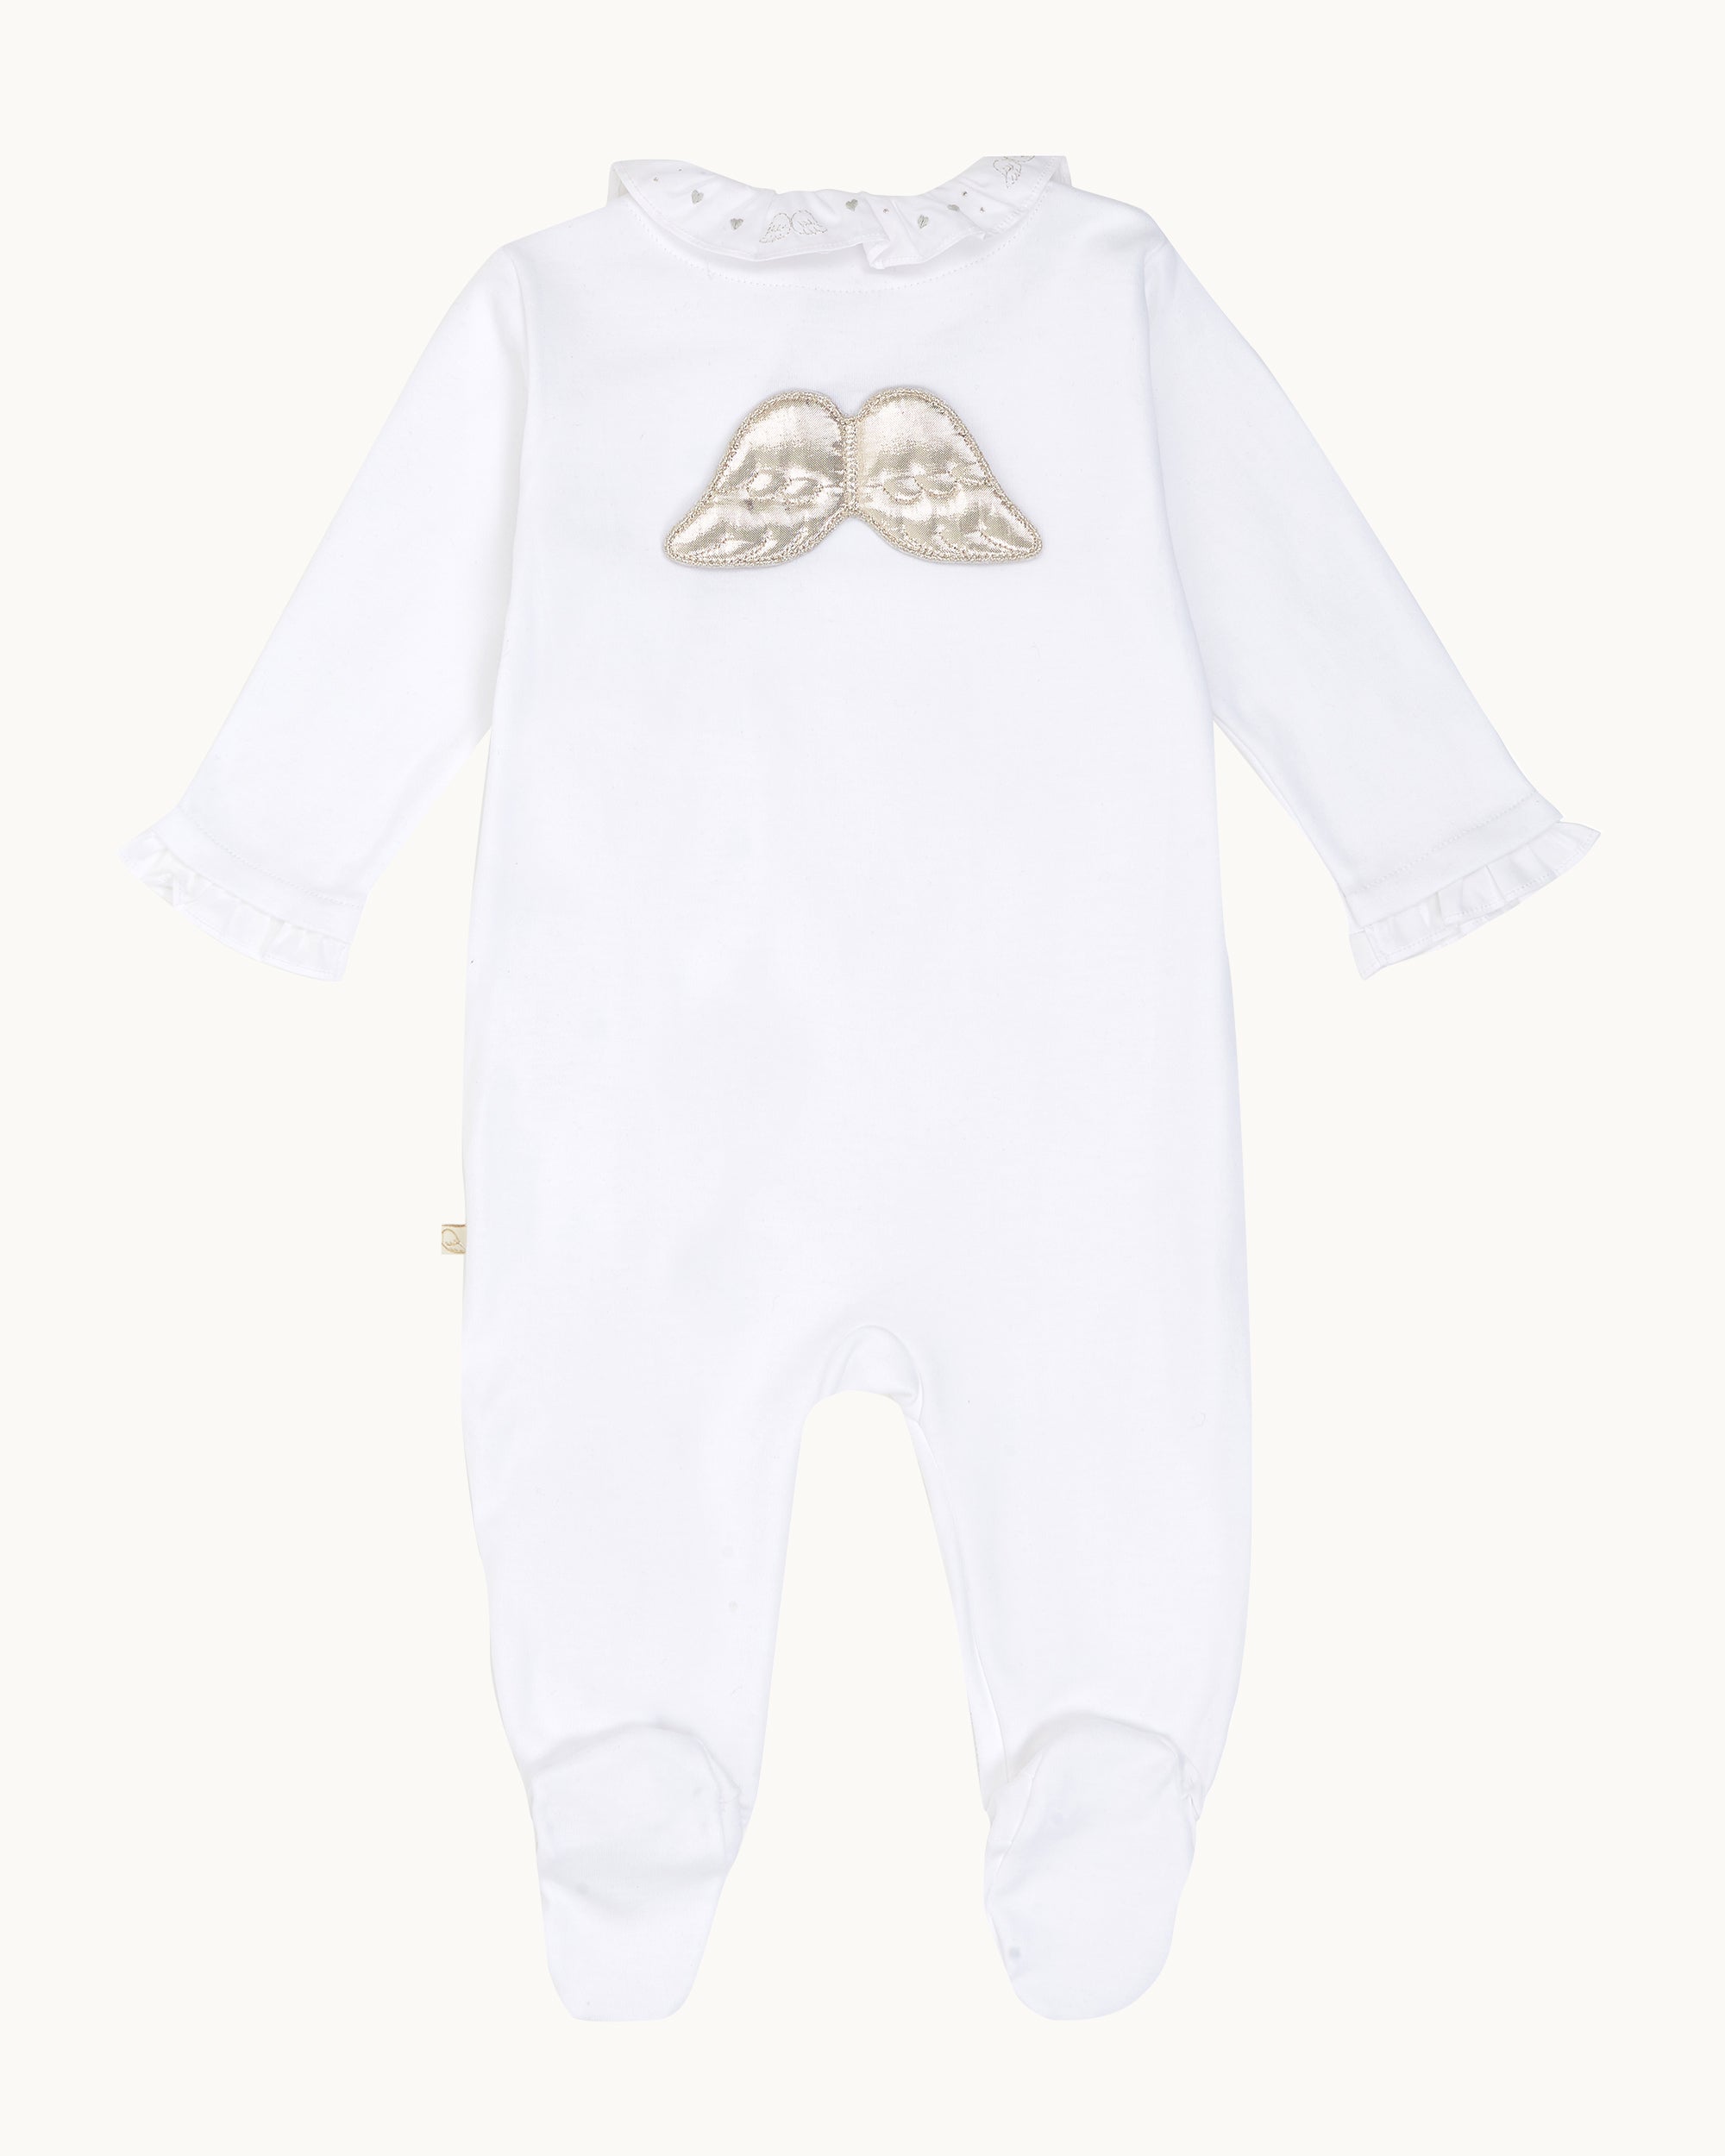 Angel Wing™ Pima Cotton Silver Sleepsuit - White & Silver